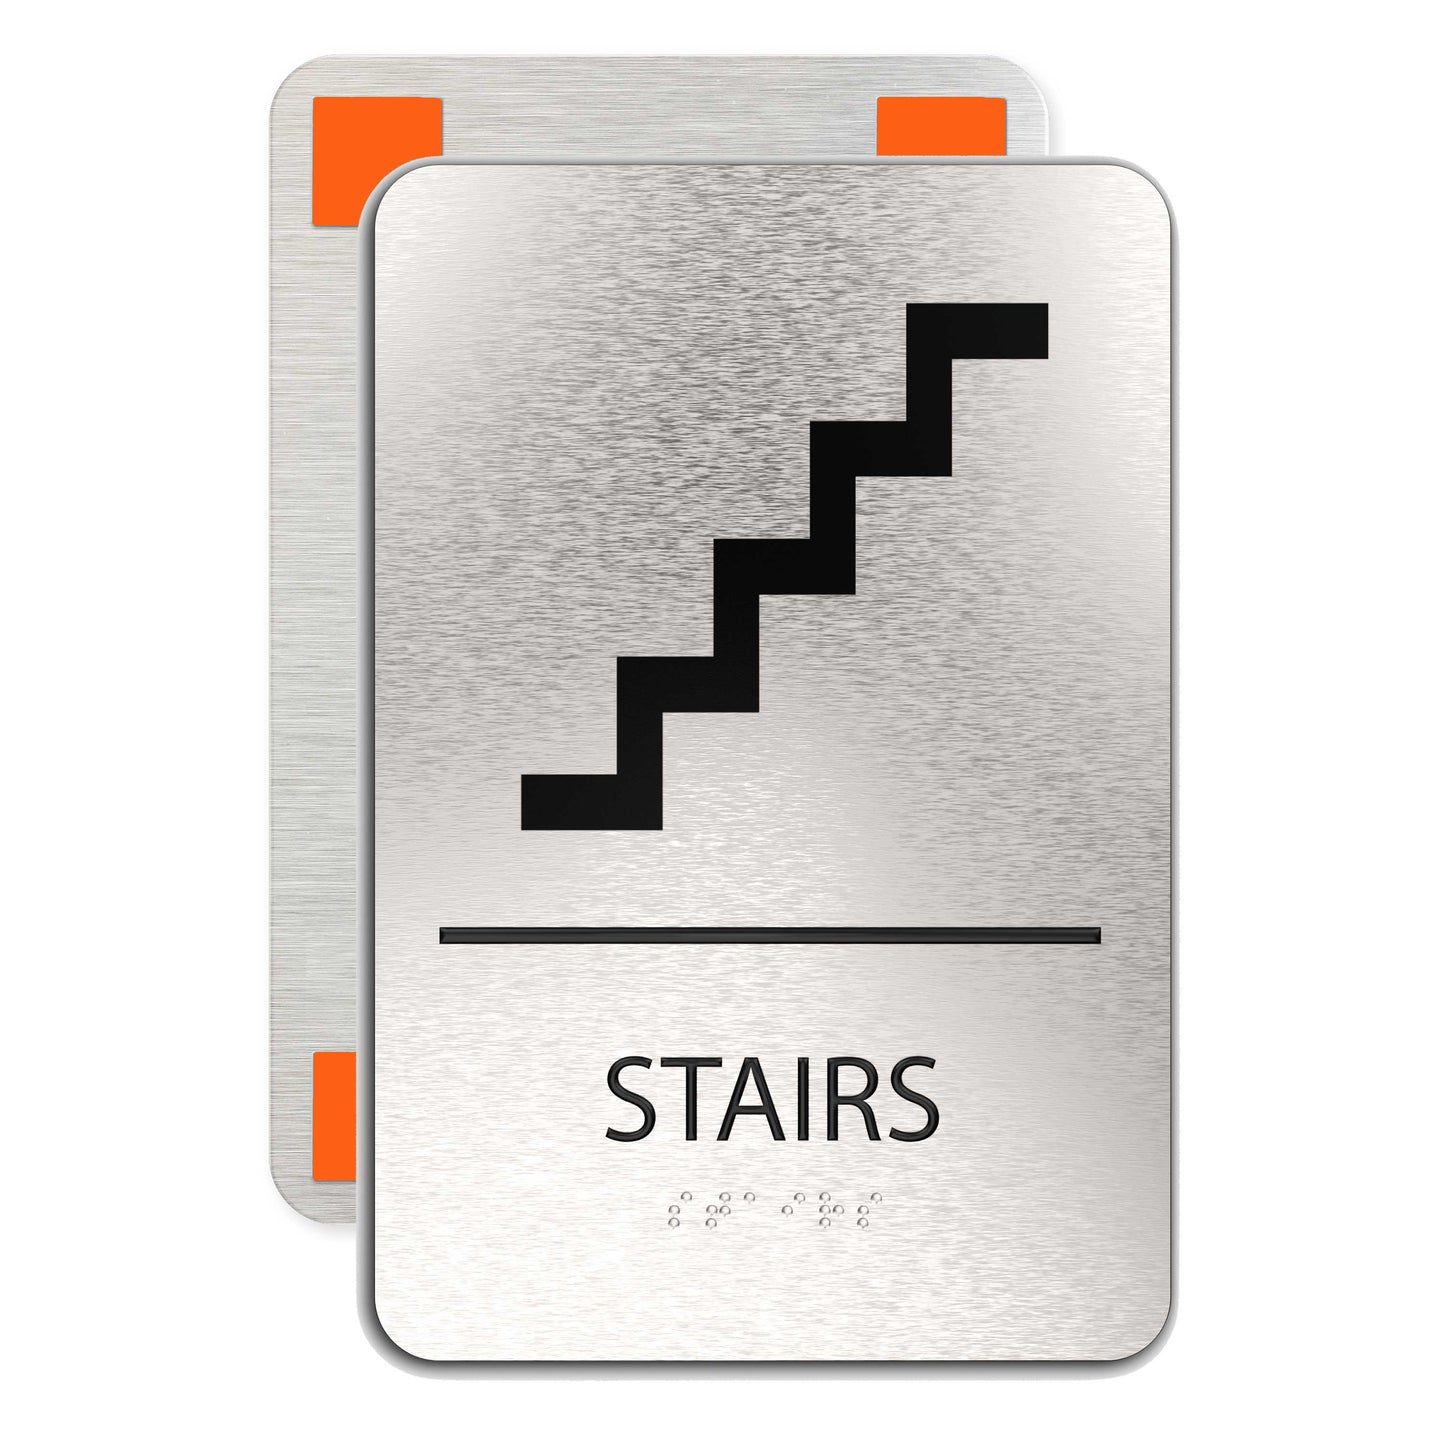 STAIRS Sign , ADA Compliant, Stairs Symbol, Brushed Silver, Raised Black Text, Non-Tactile Pictograms and Grade 2 Braille, 6"X9"